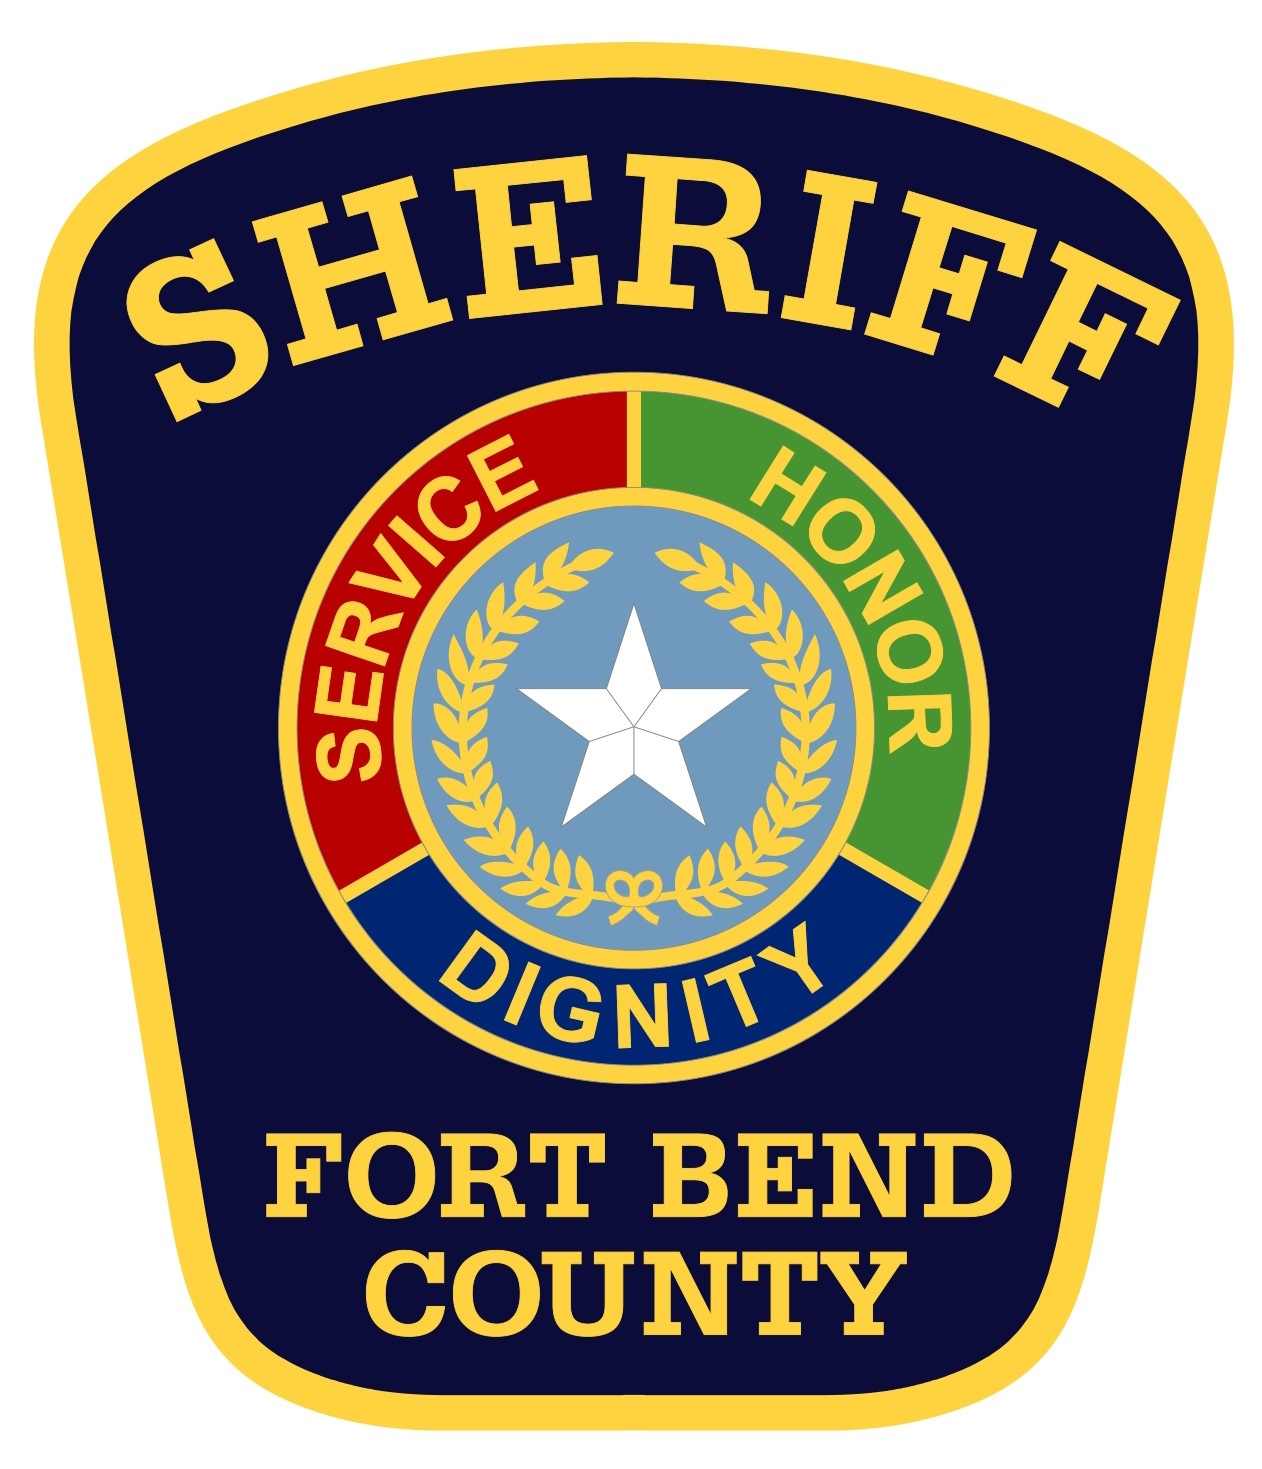 Fort Bend County